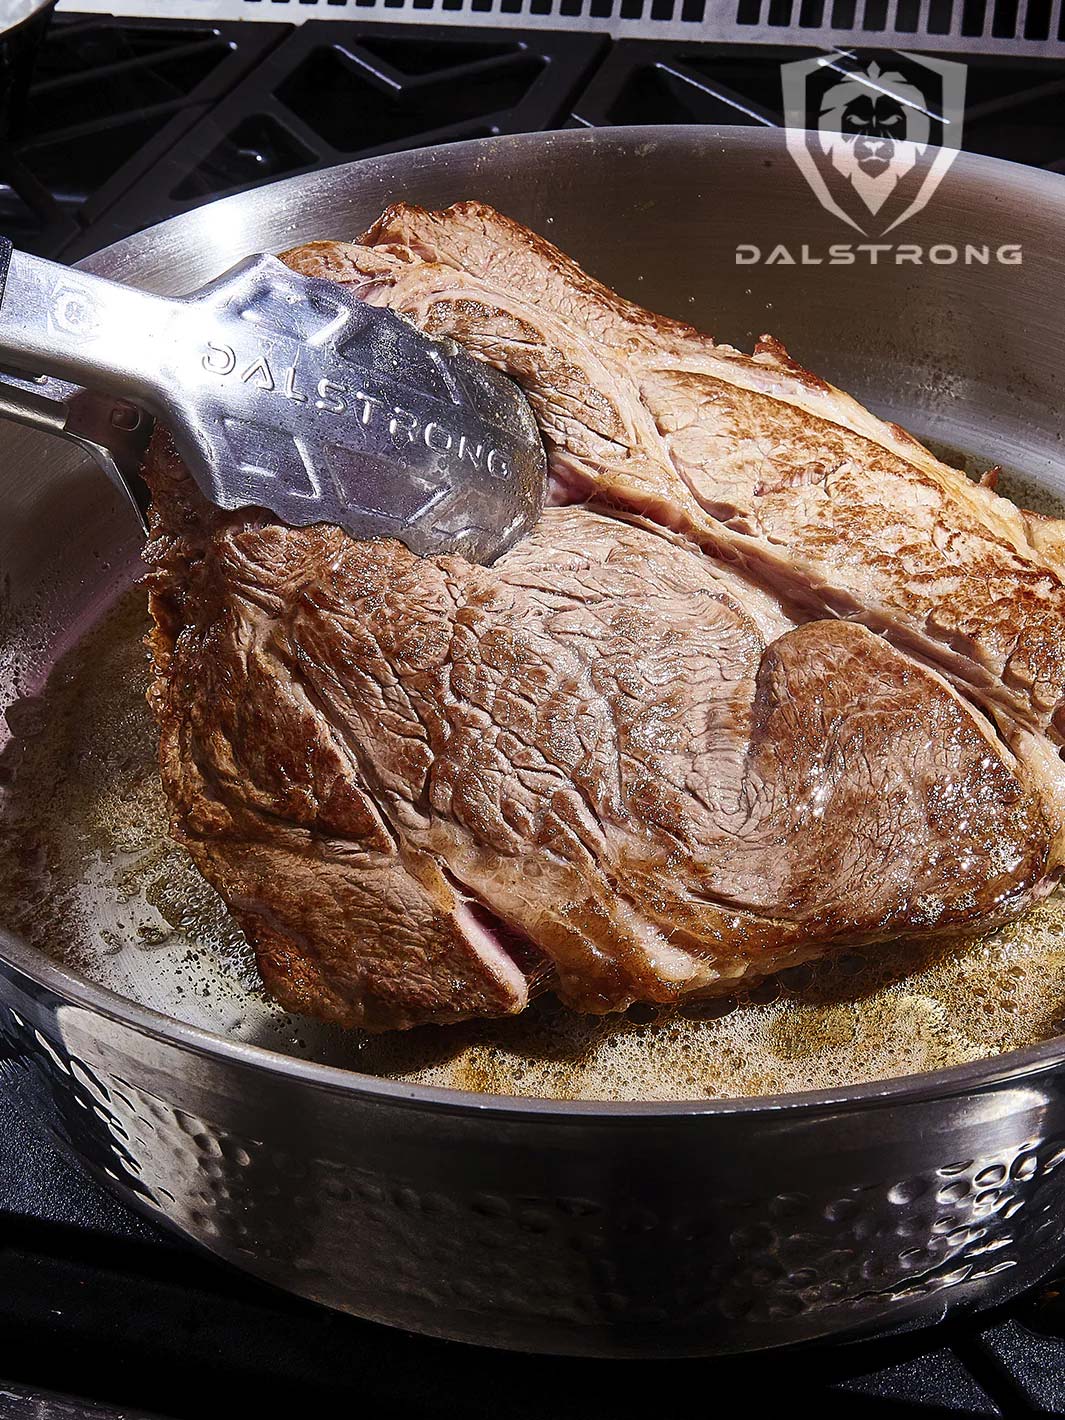 12 Skillet Frying Pan | Silver | The Avalon Series | Dalstrong